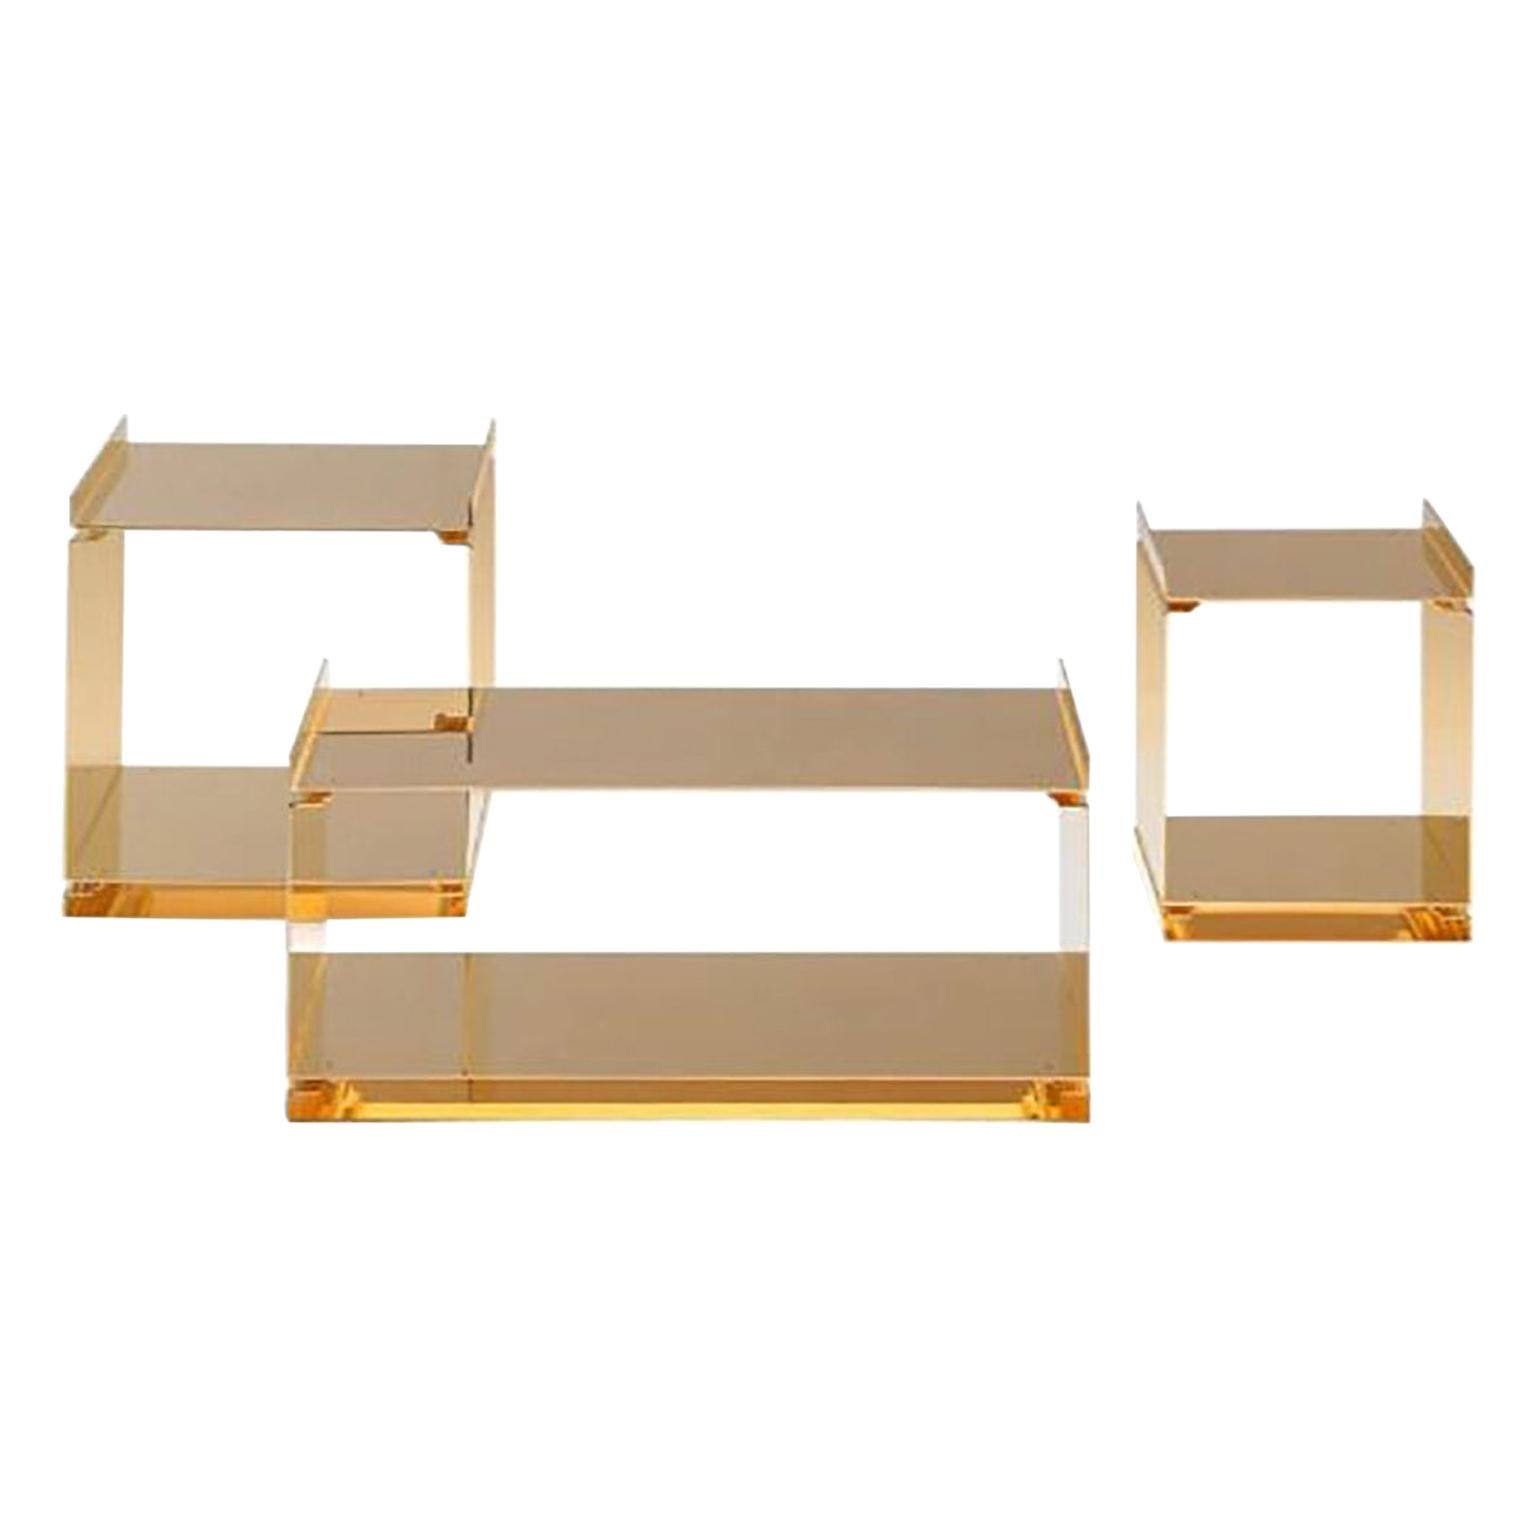 Contemporary Tables of Interlocking Steel Elements, 24-Karat Gold-Plated